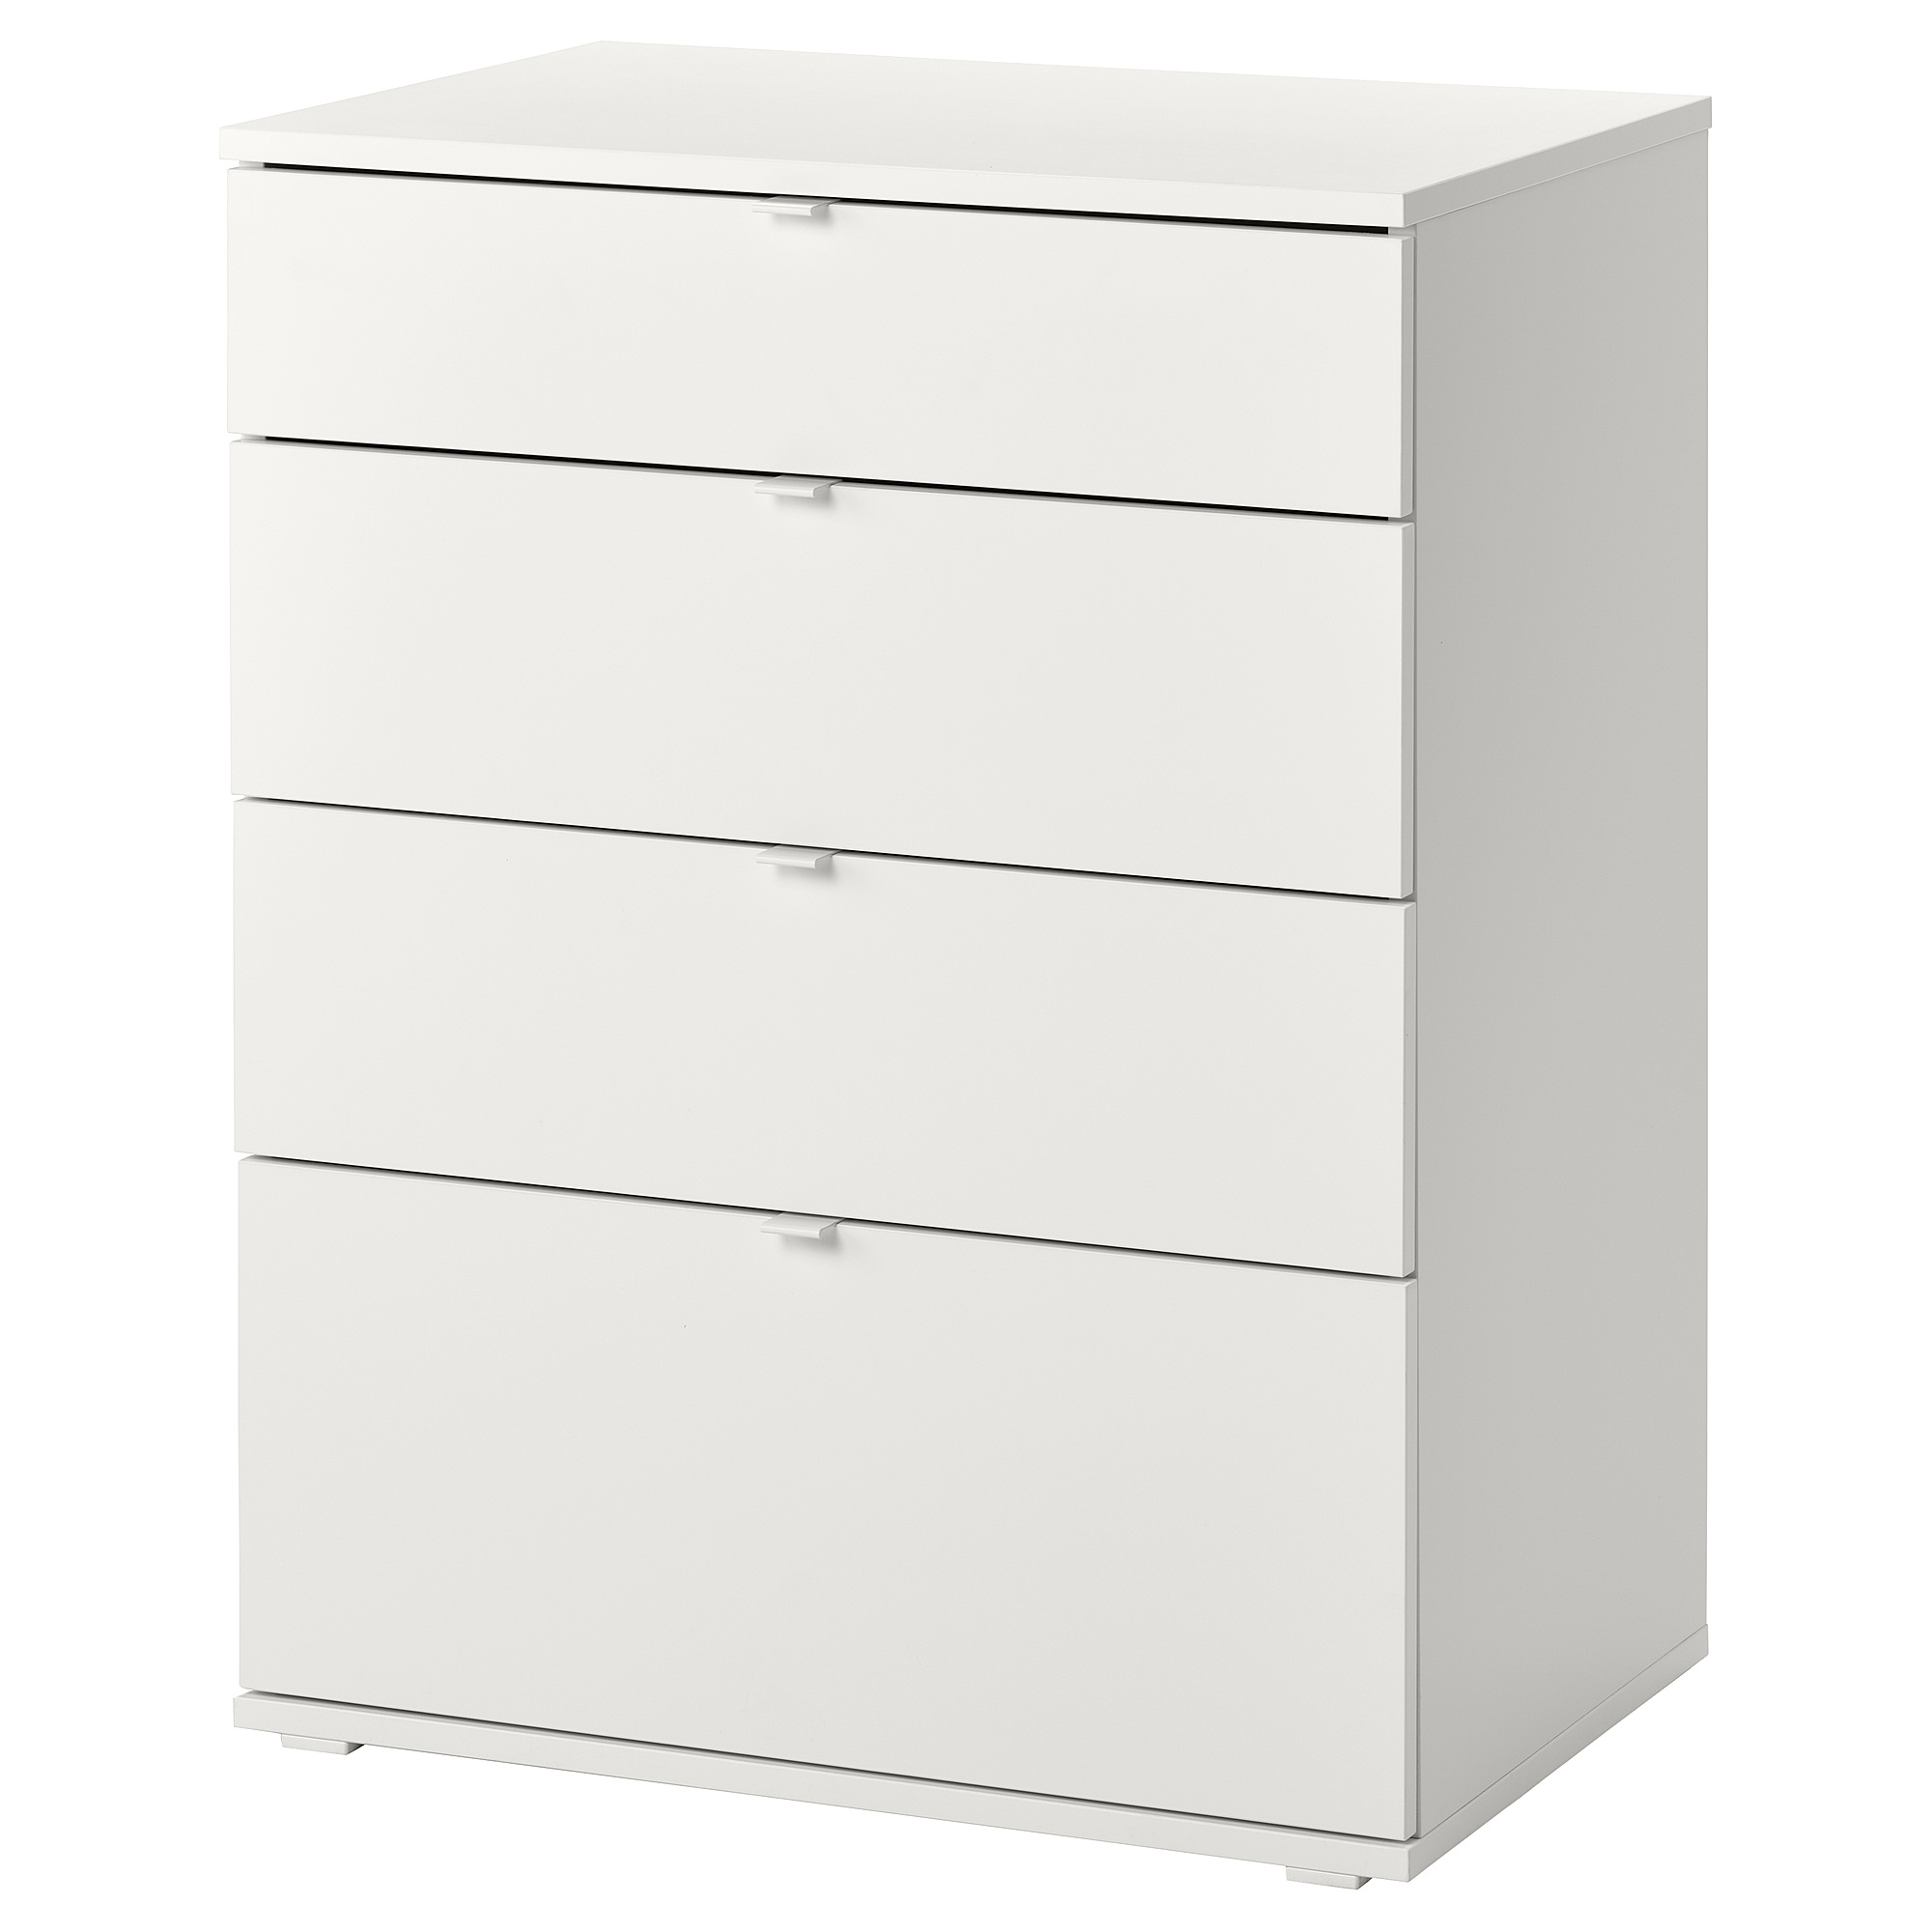 VIHALS chest of 4 drawers